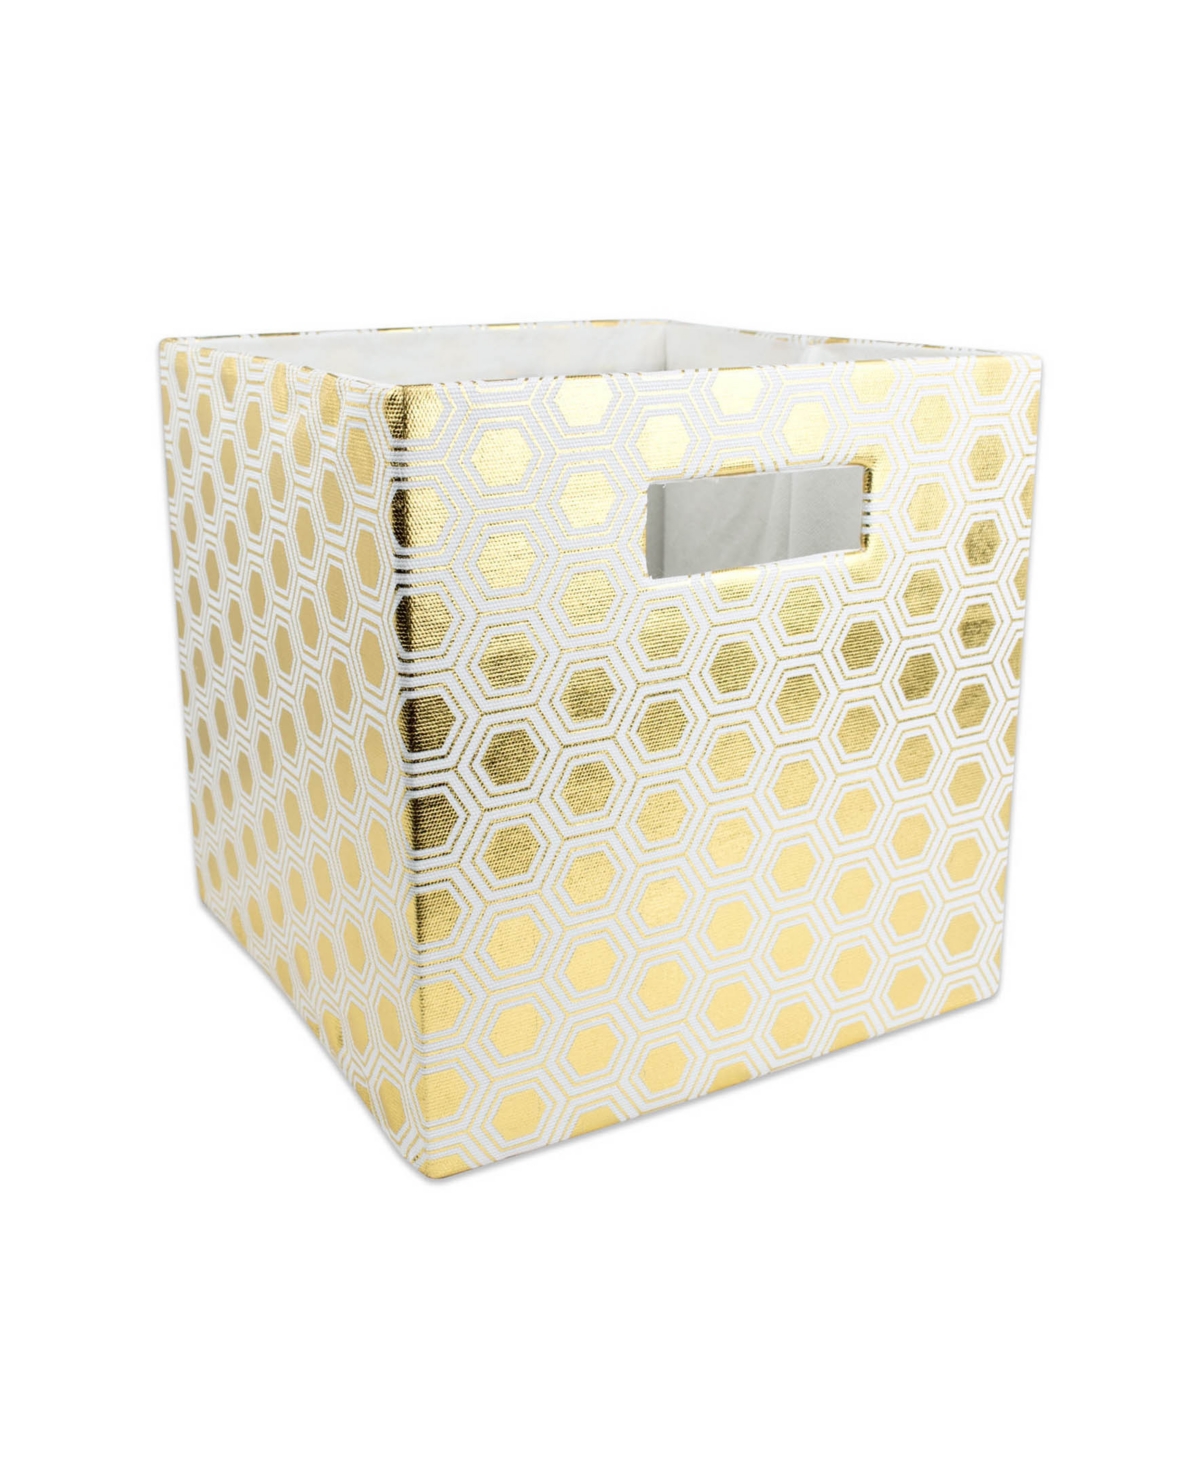 Design Imports Honeycomb Print Polyester Storage Bin In Gold Honeycomb